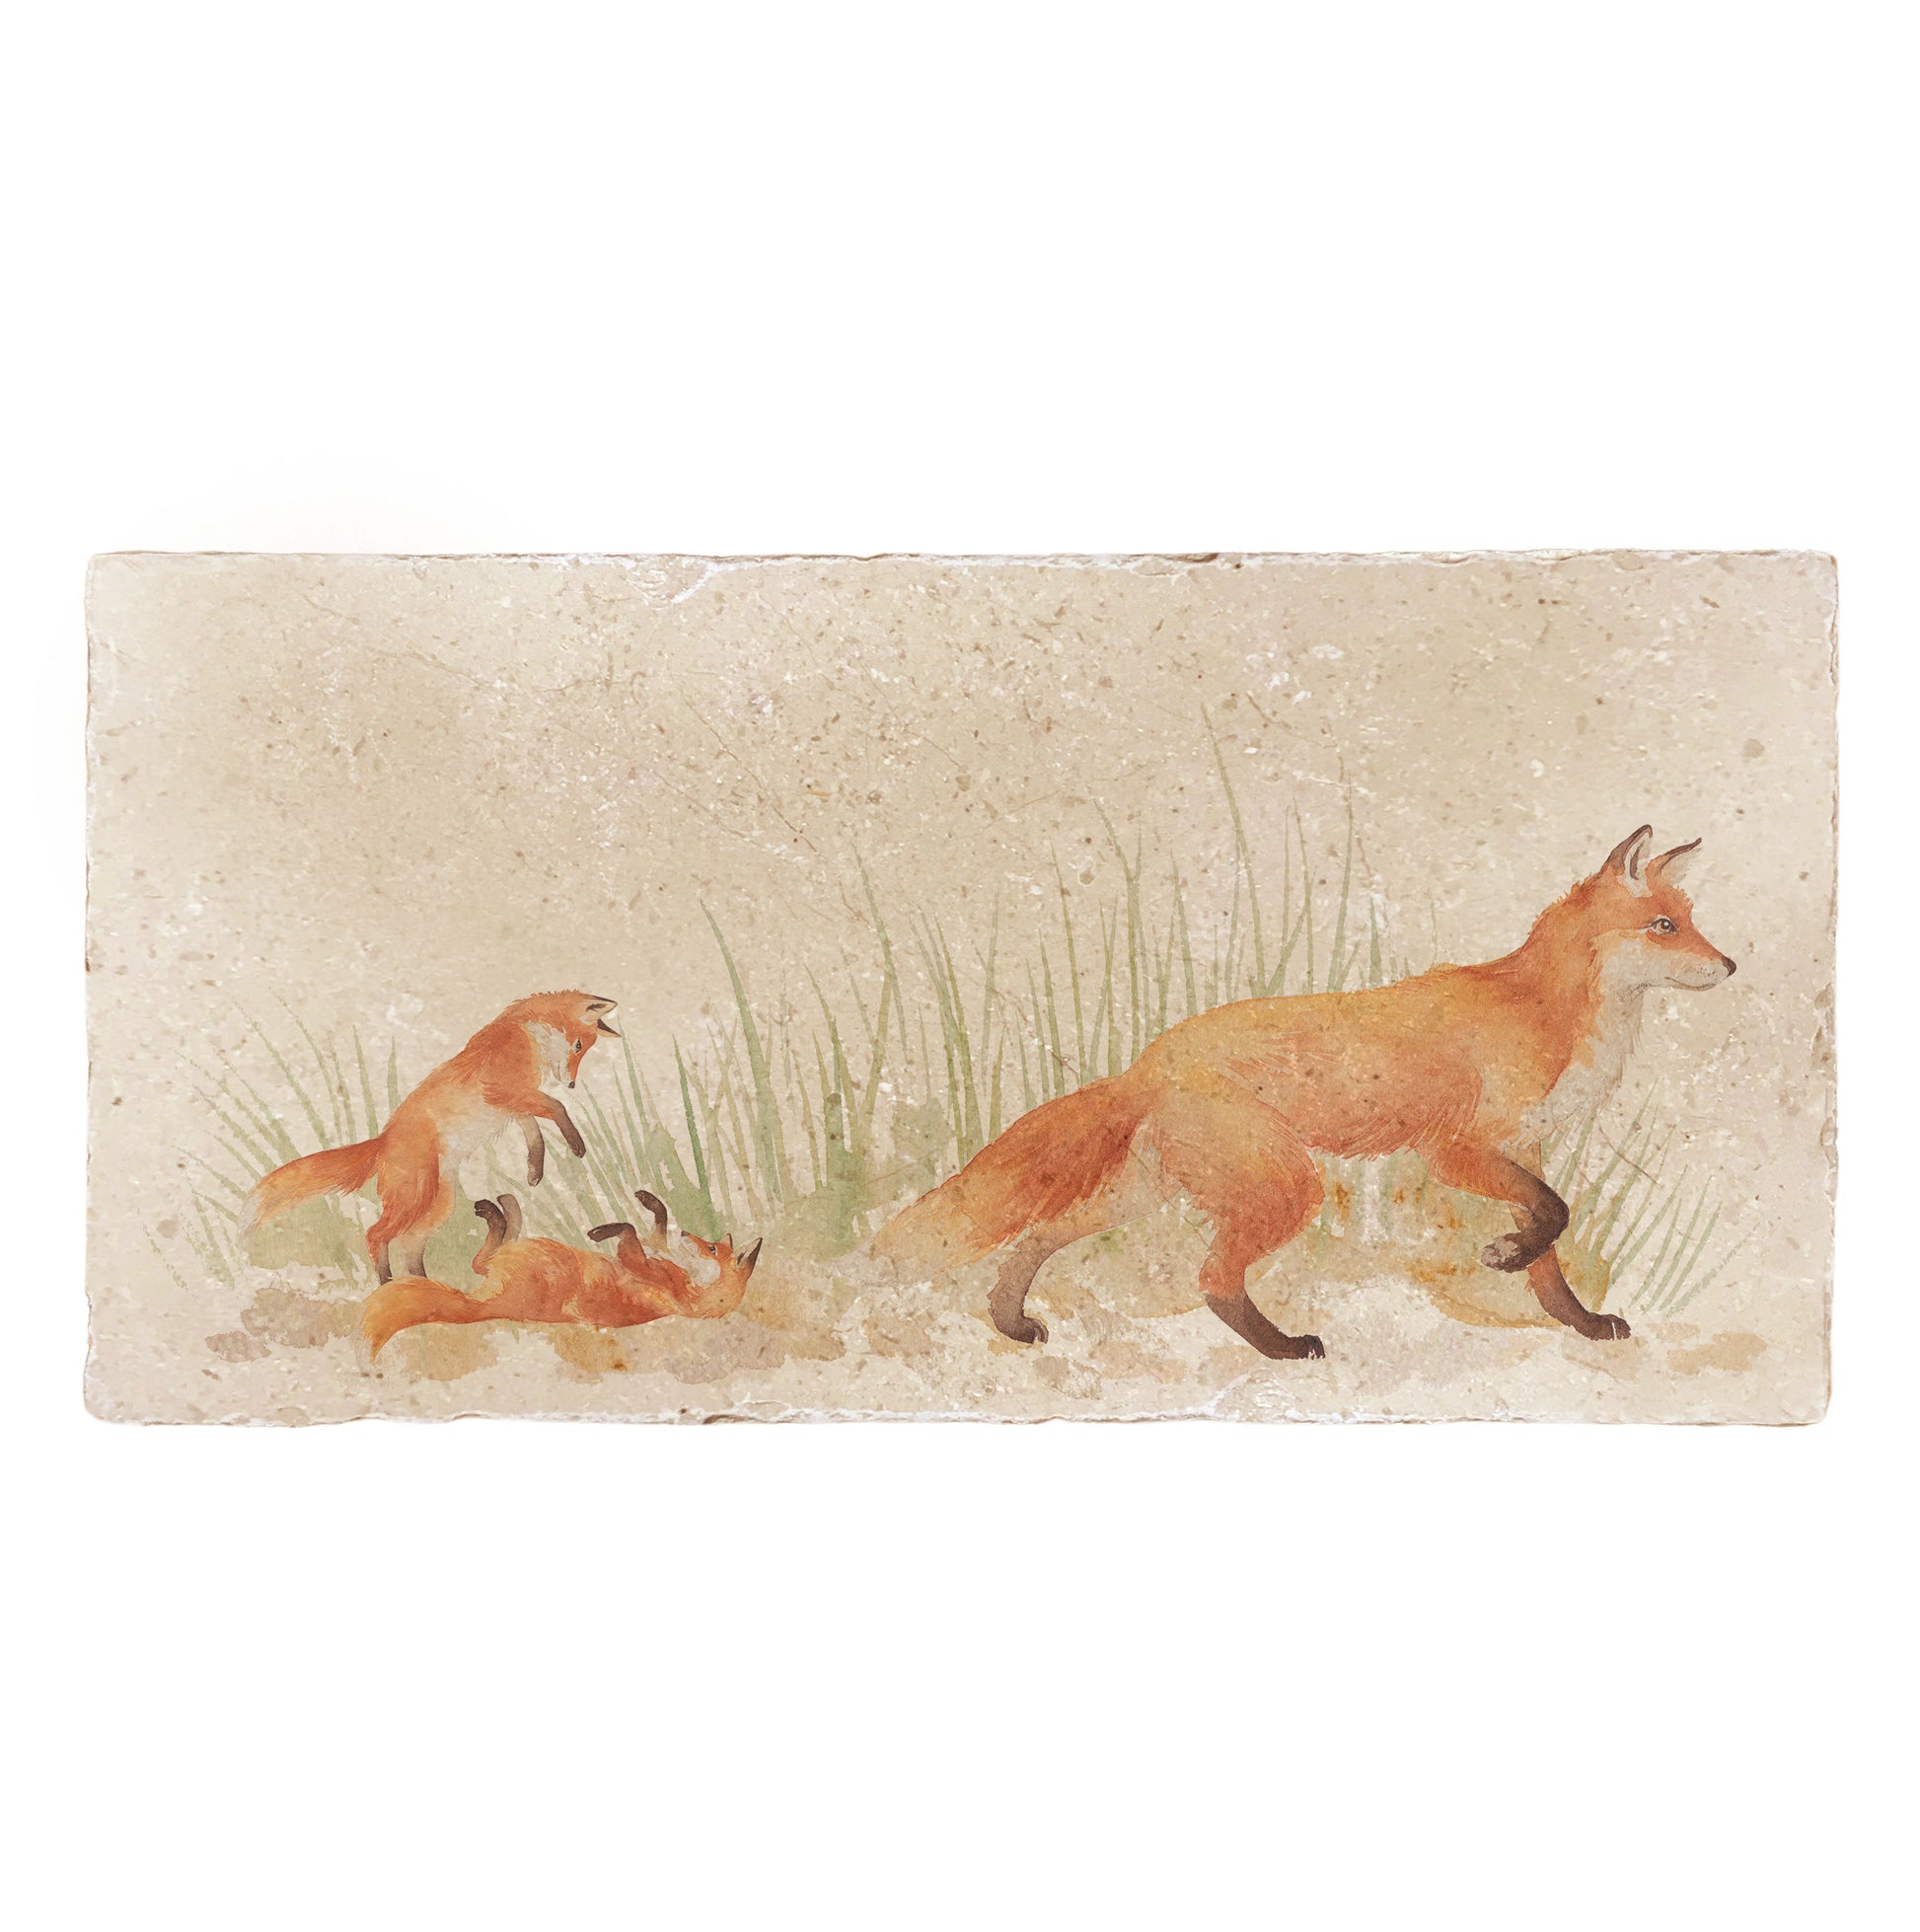 A handmade rectangle cream marble splashback tile featuring a watercolour countryside animal design of a fox and her fox cub in grass.